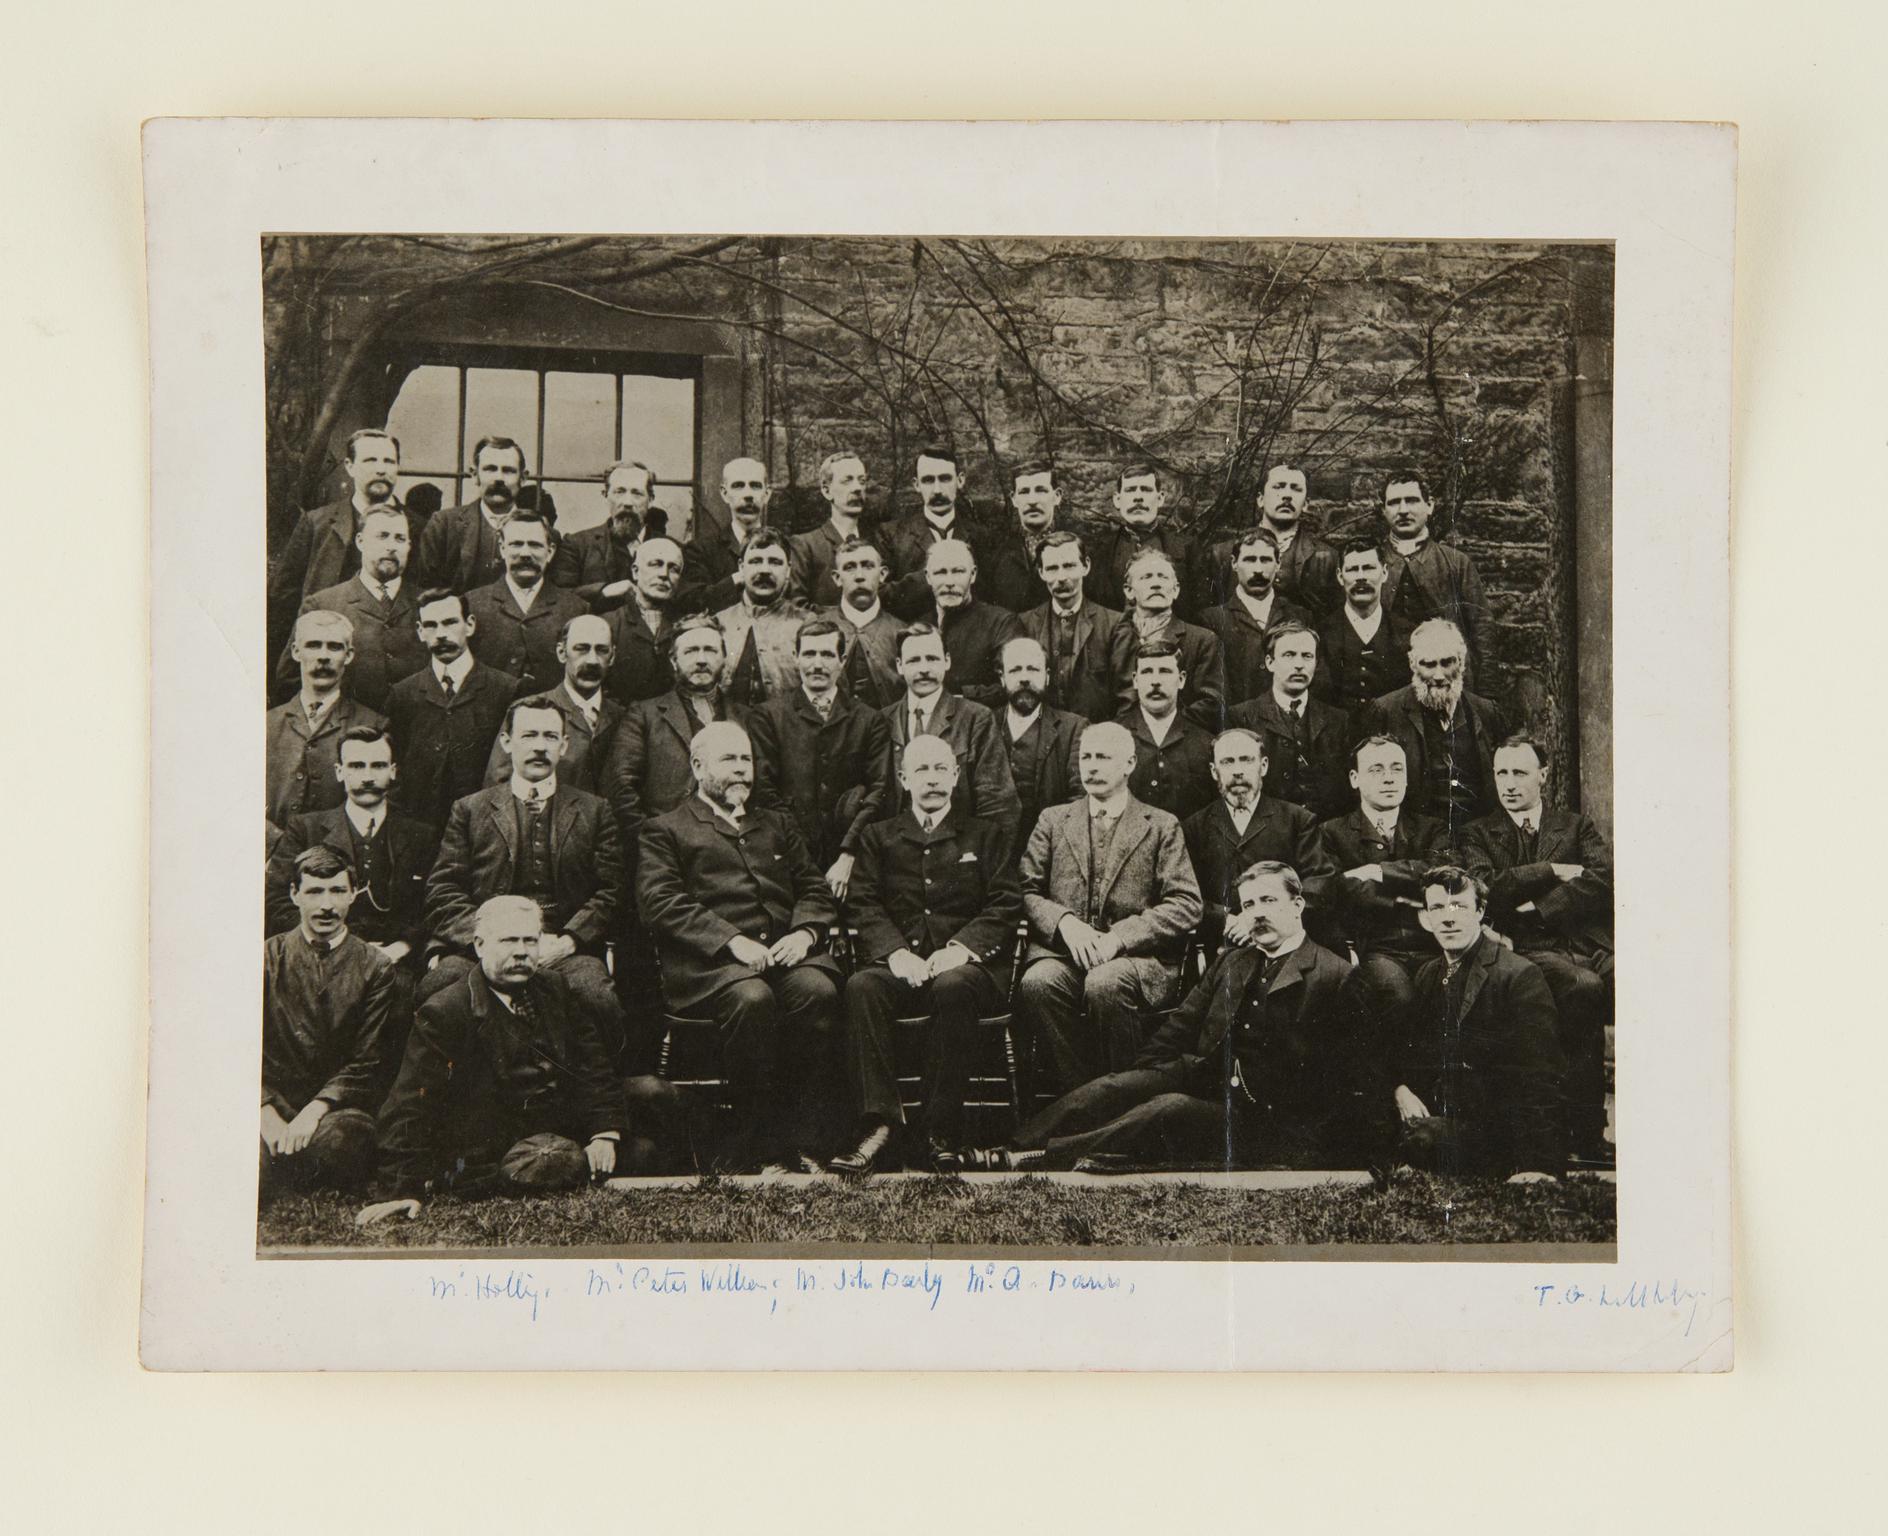 Brymbo works office staff, photograph